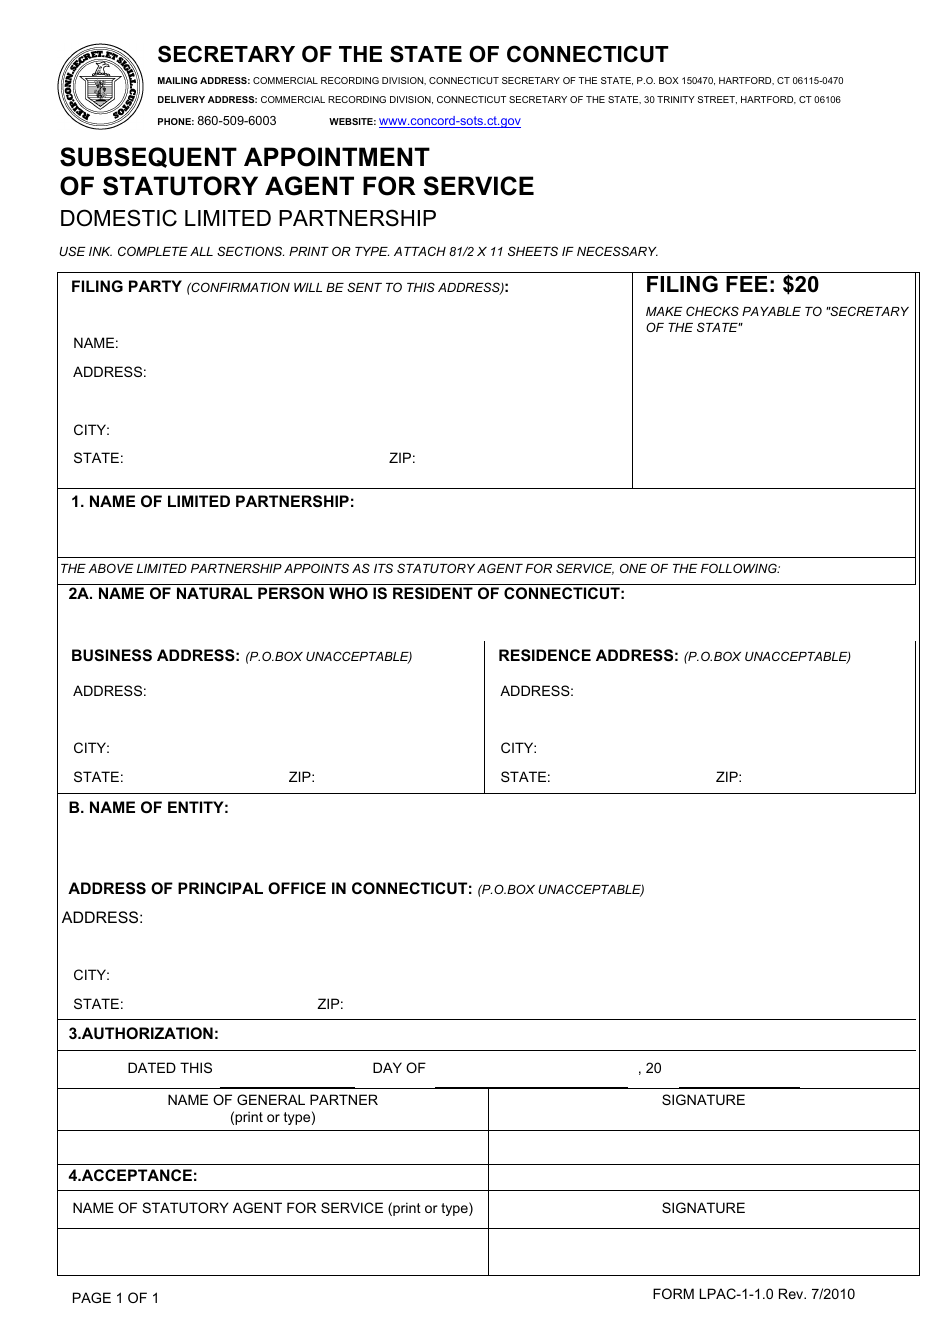 Form LPAC-1-1.0 Subsequent Appointment of Statutory Agent for Service - Domestic Limited Partnership - Connecticut, Page 1